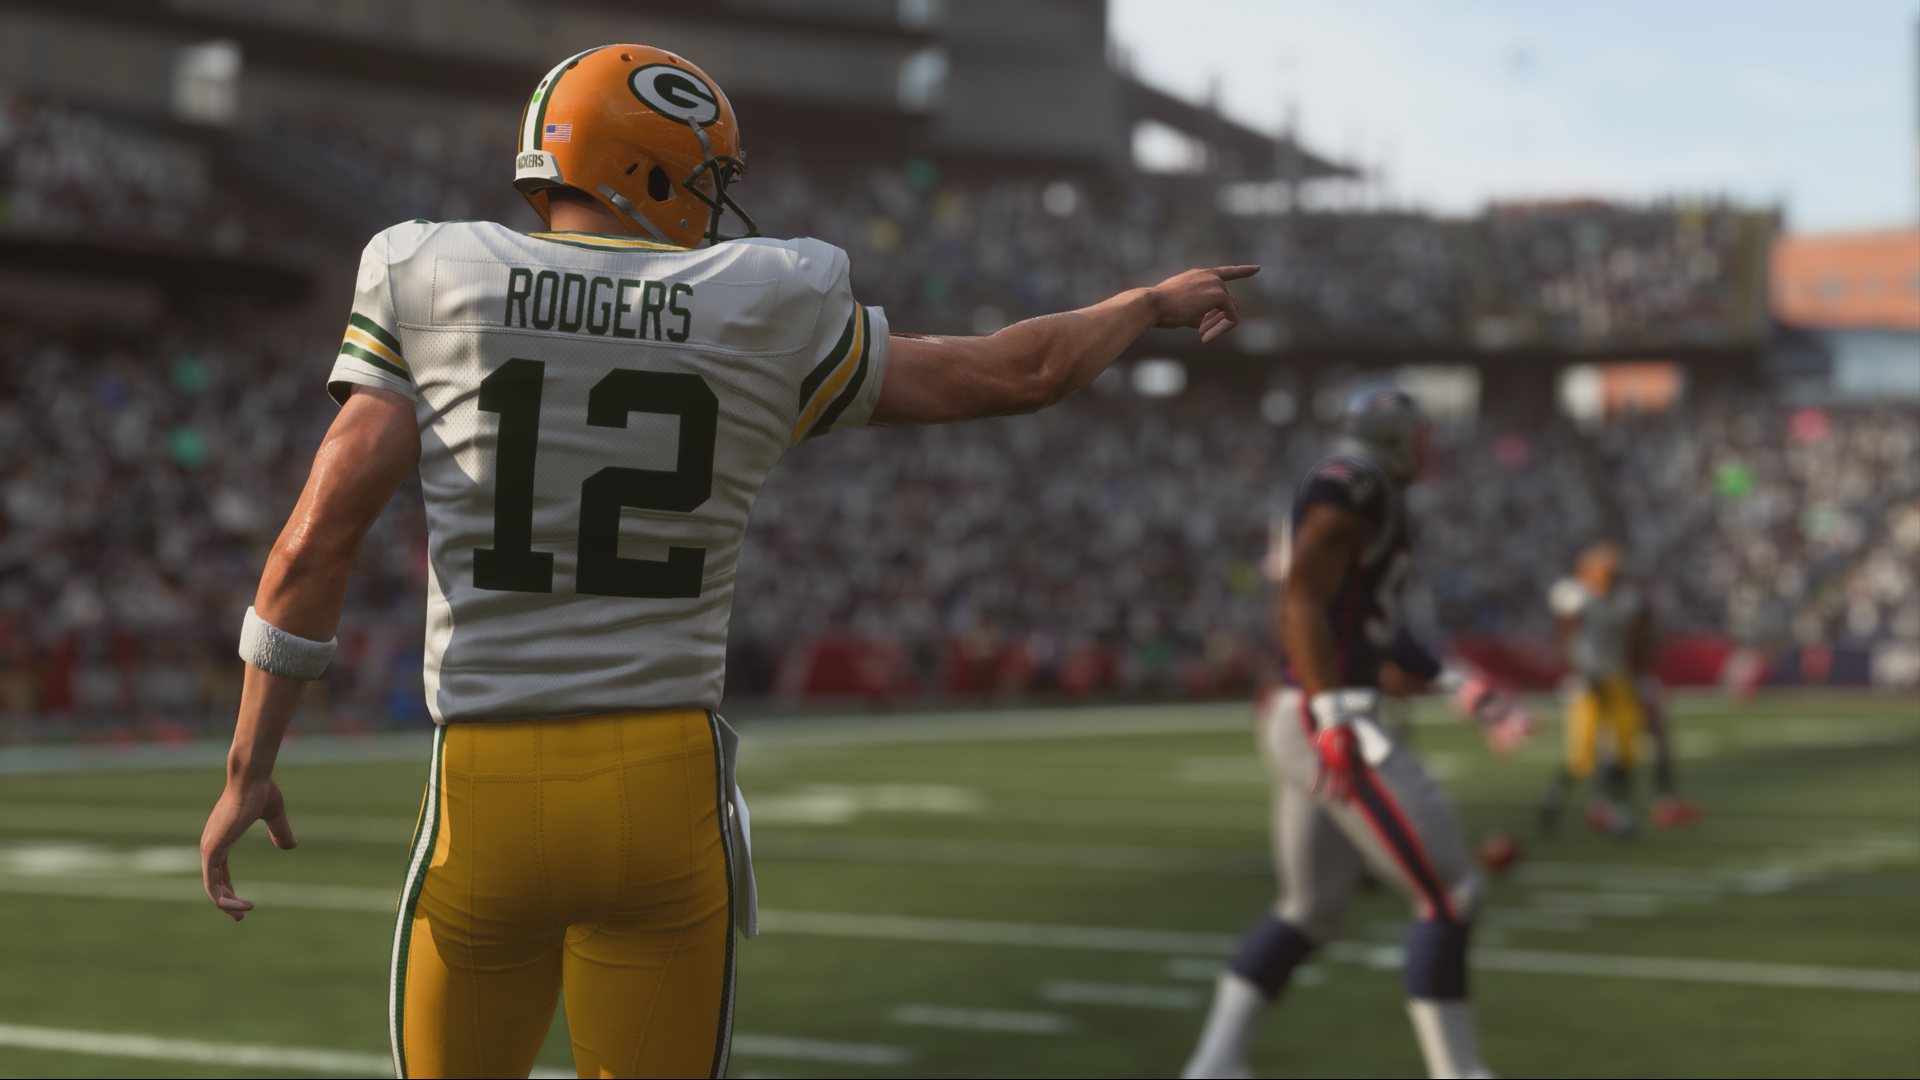 Icon for Aaron Rodgers Legacy Award